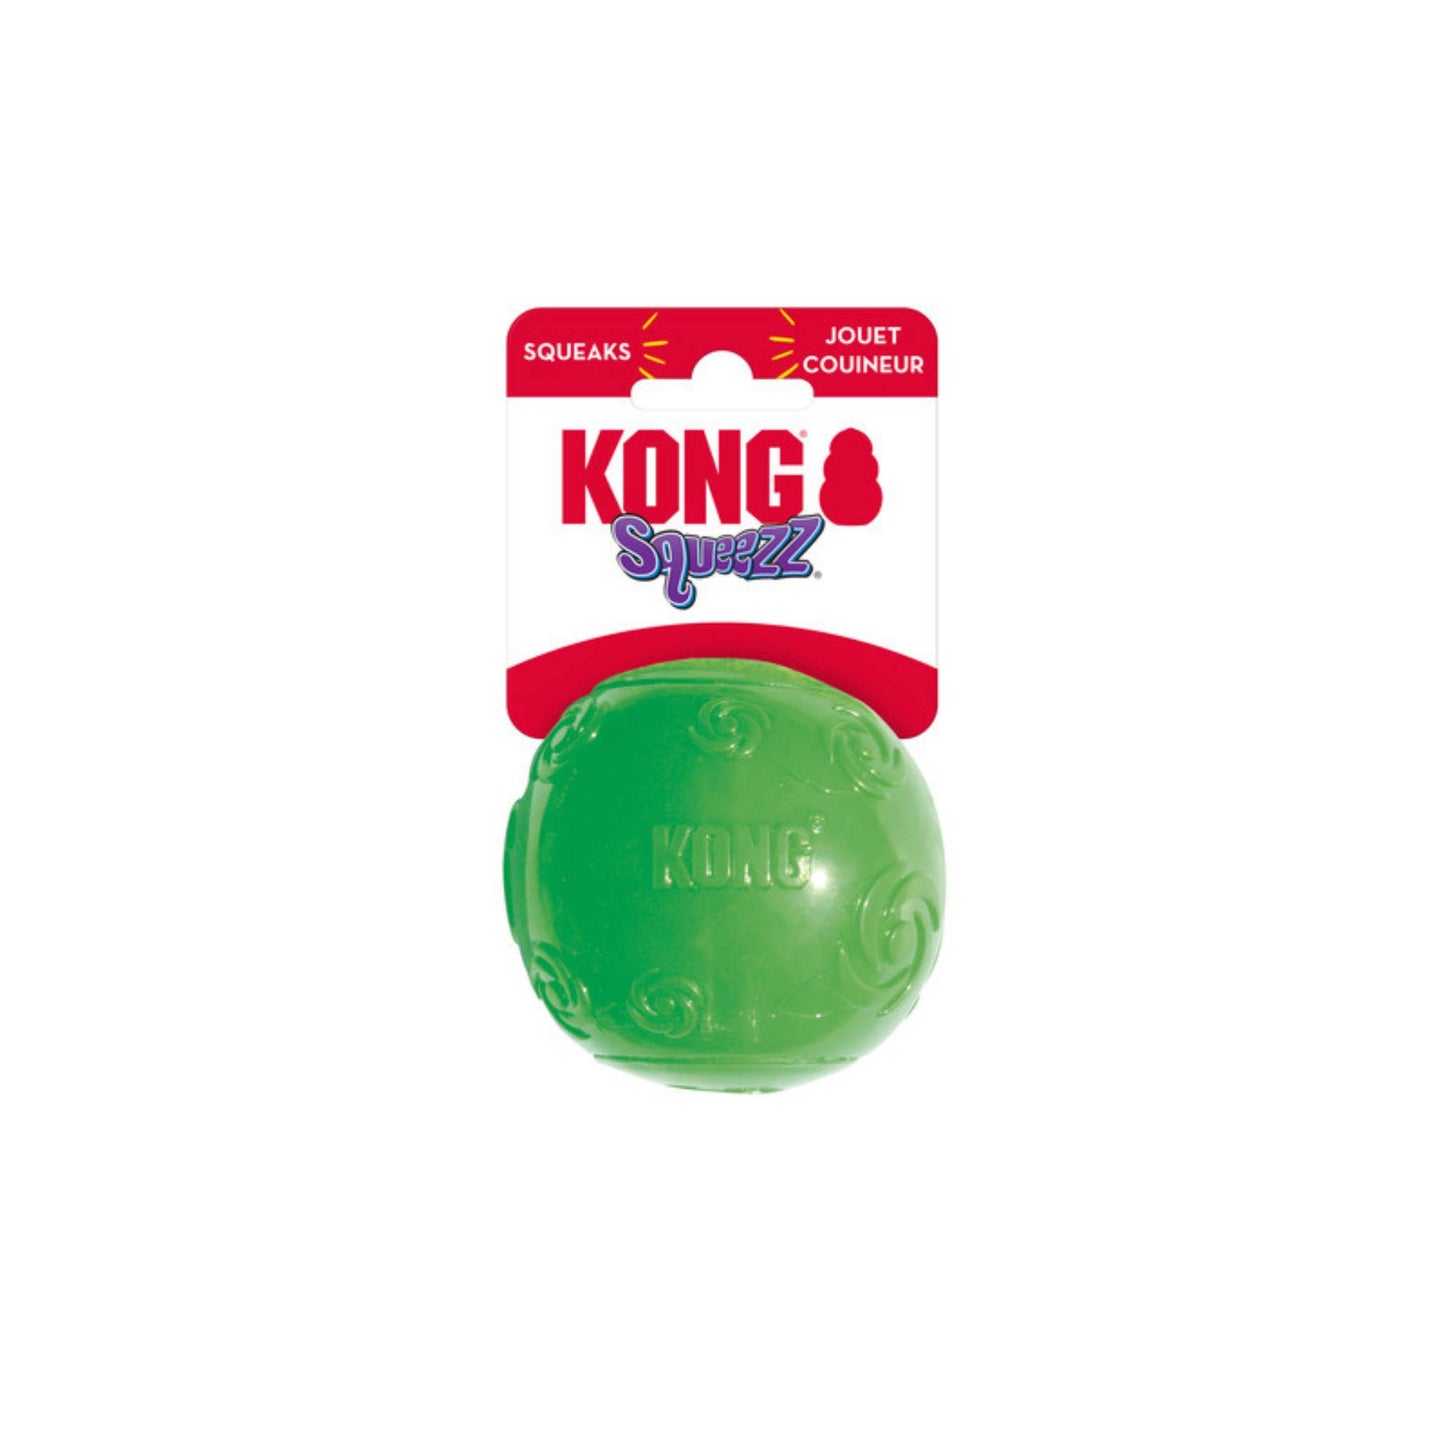 KOng Squeez ball with packaging